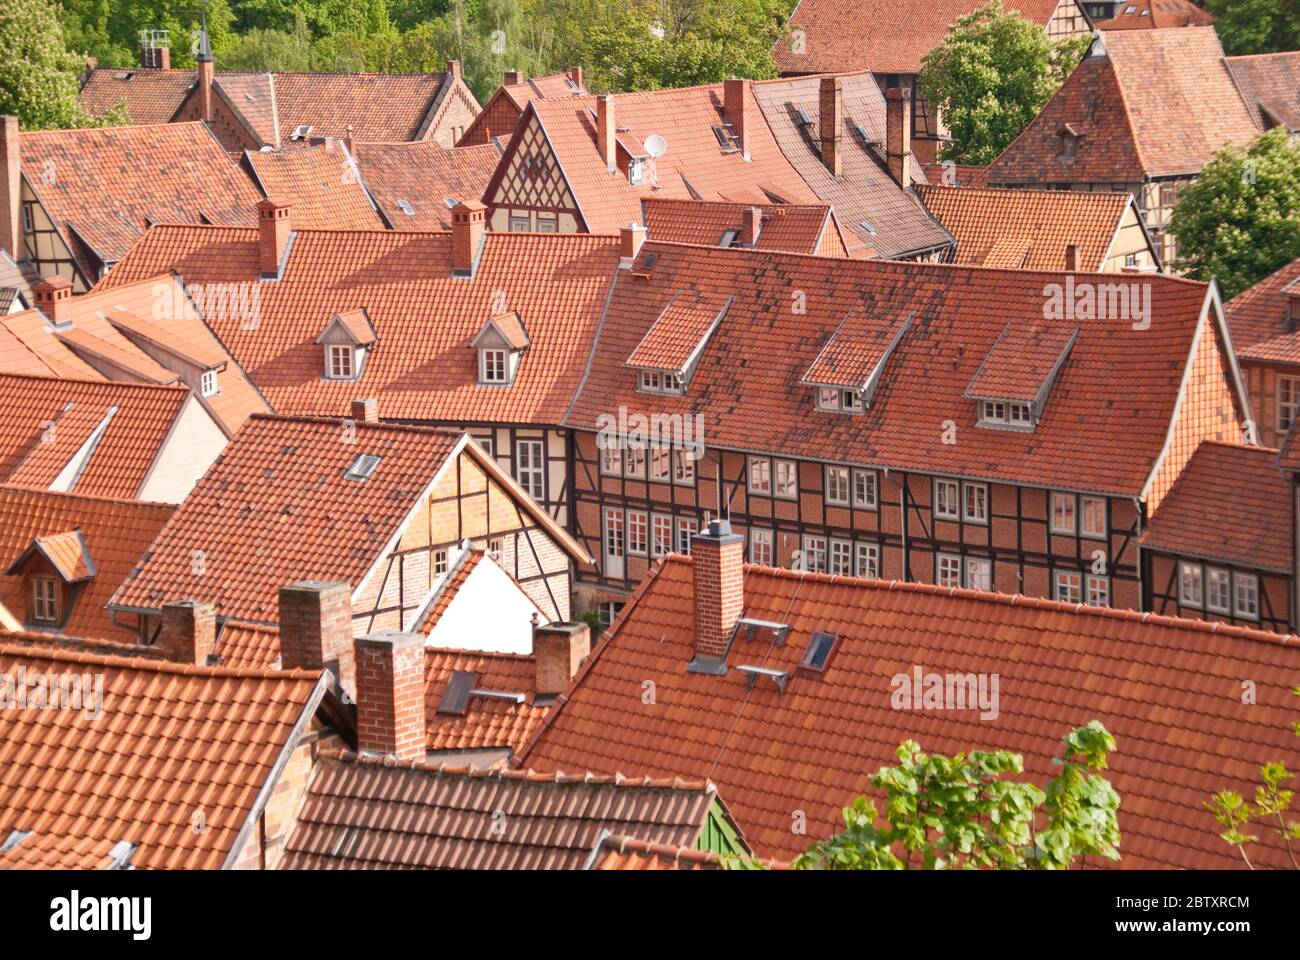 In the historic old town of Quedlinburg, Germany Stock Photo